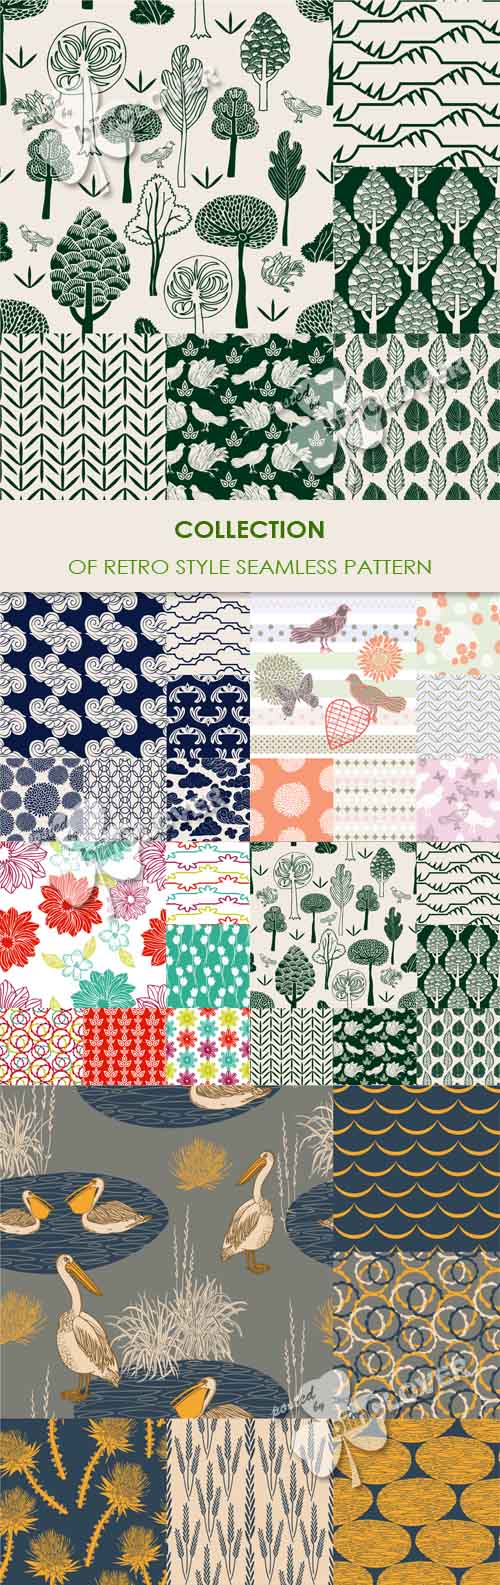 Collection of retro style seamless pattern 0230